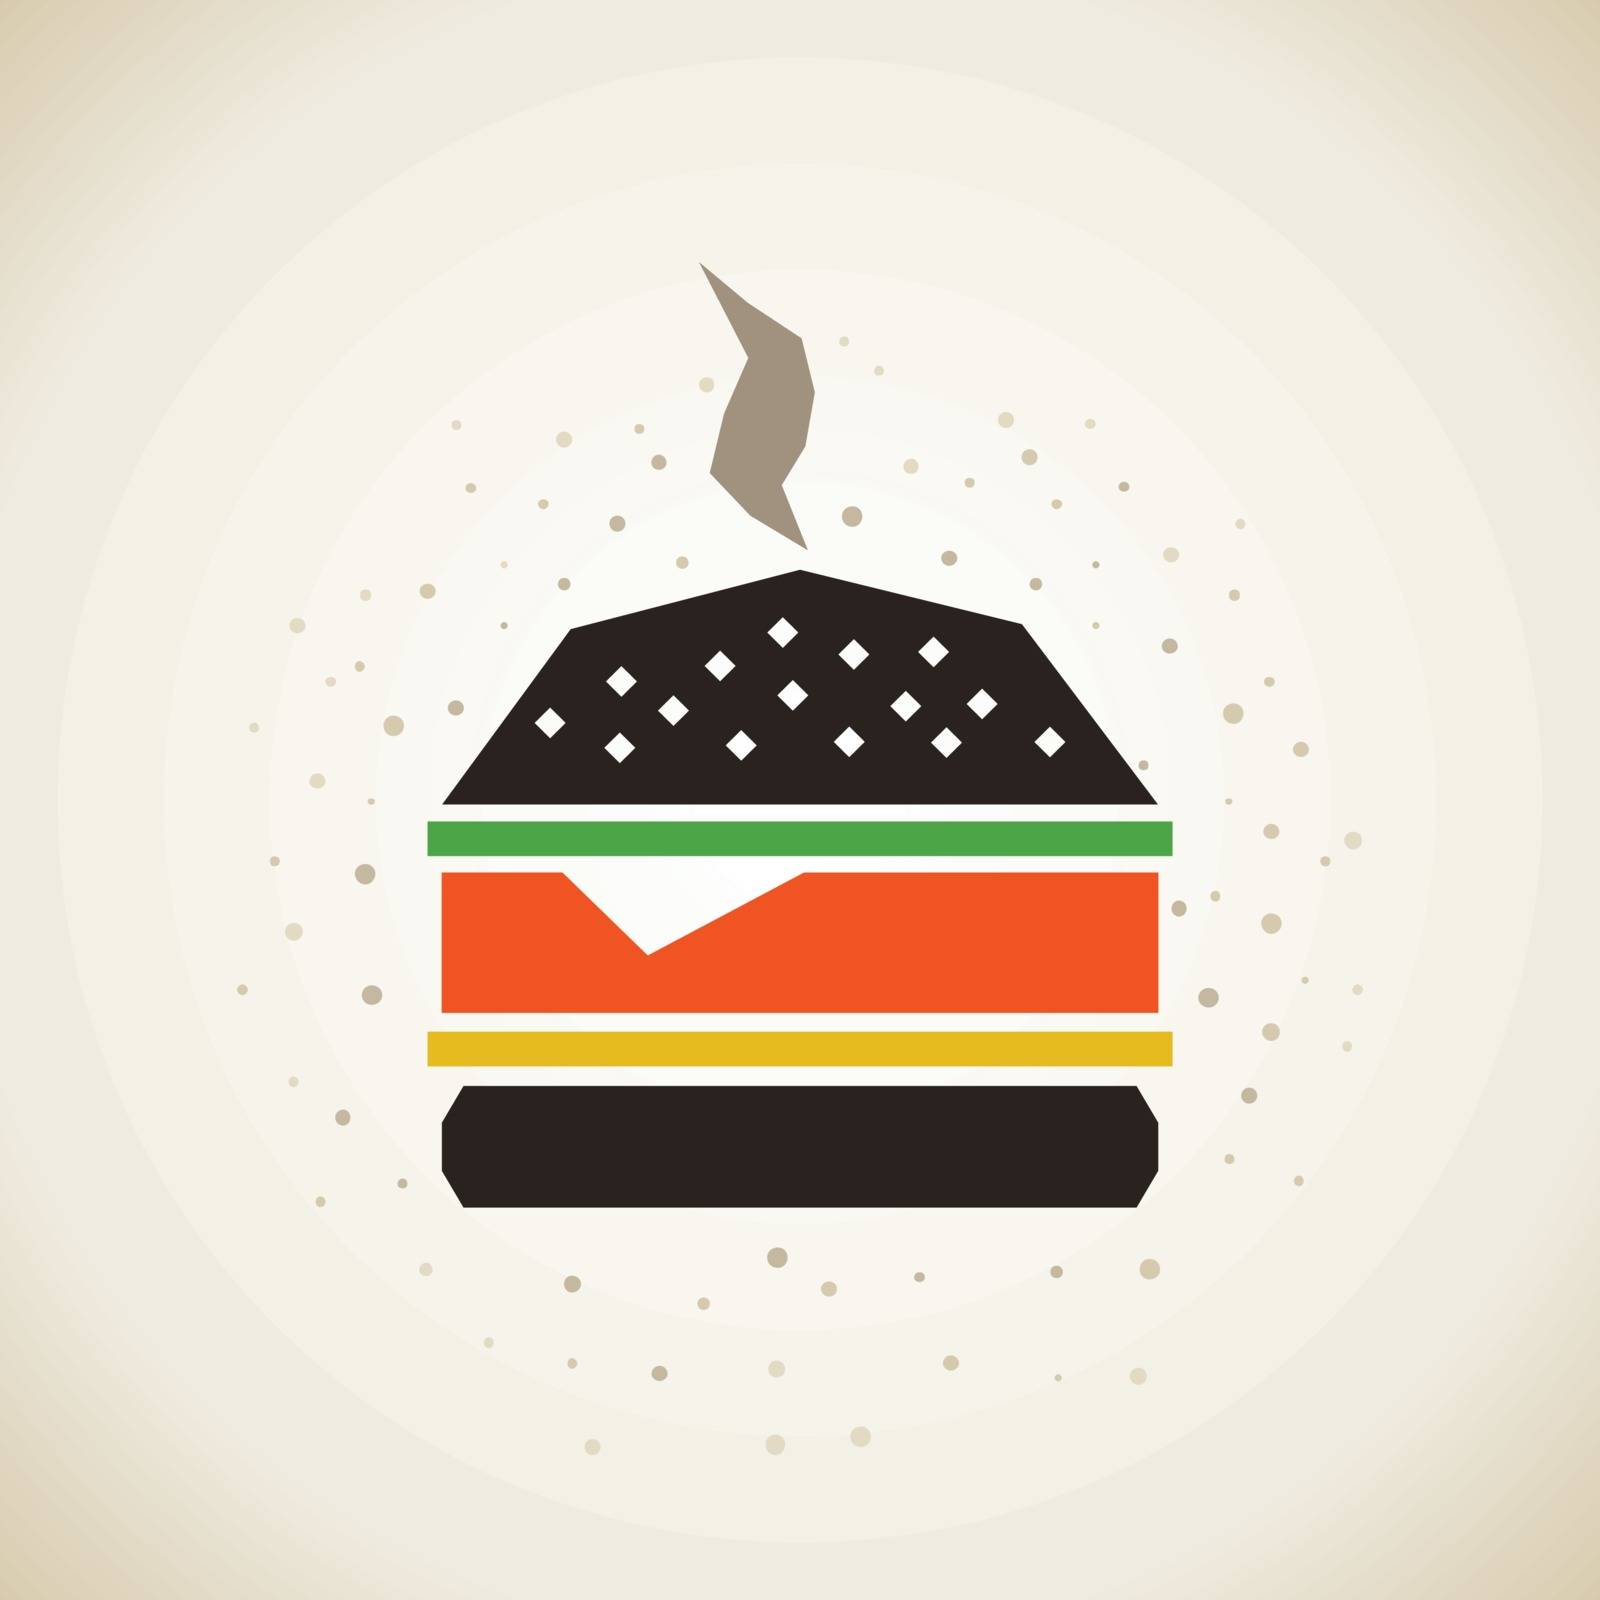 The Burger in the style of patchwork. Vector illustration